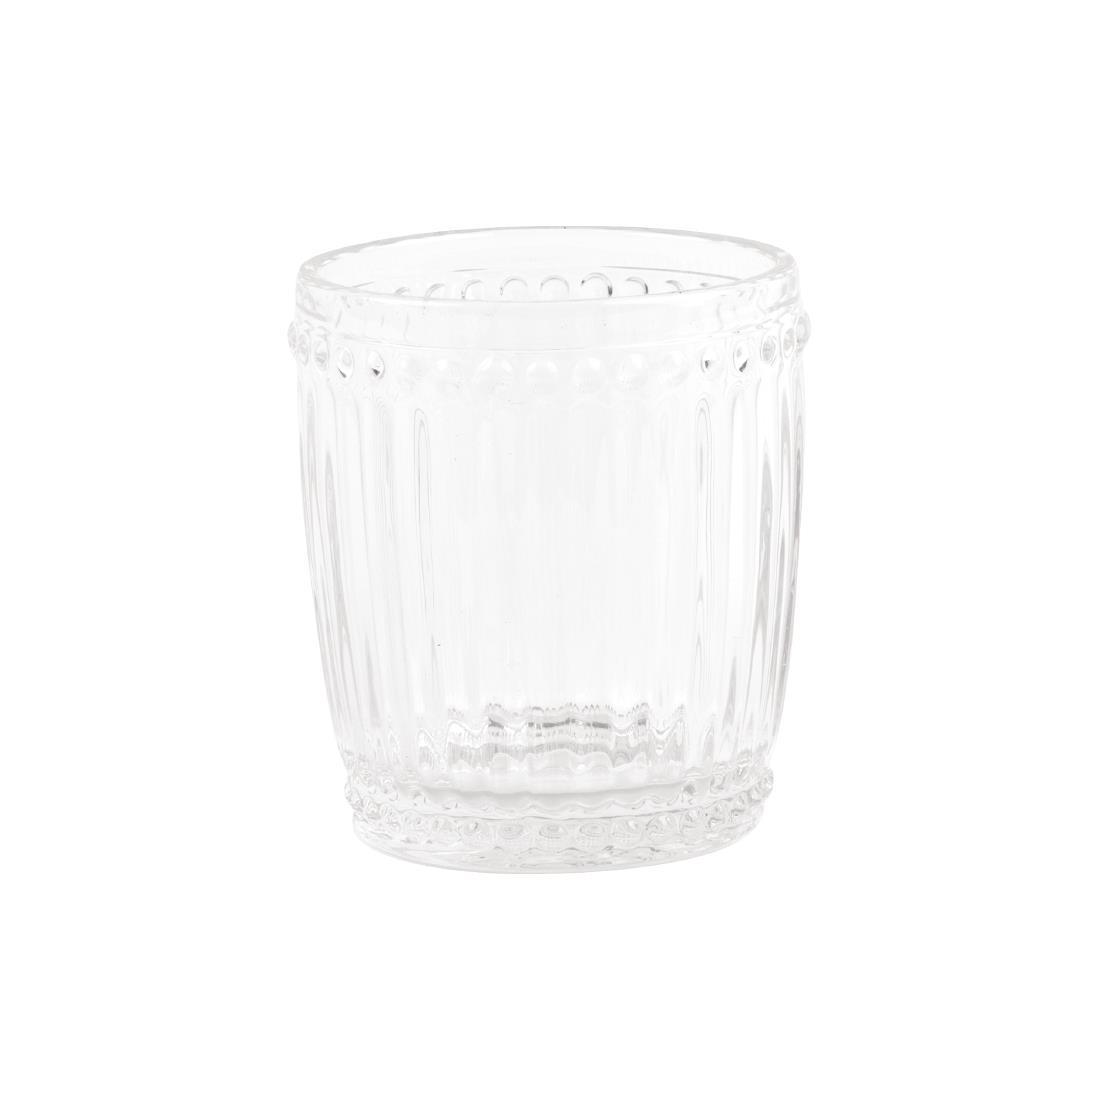 Olympia Baroque Whiskey Glasses Clear 325ml (Pack of 6) - CW397  - 2